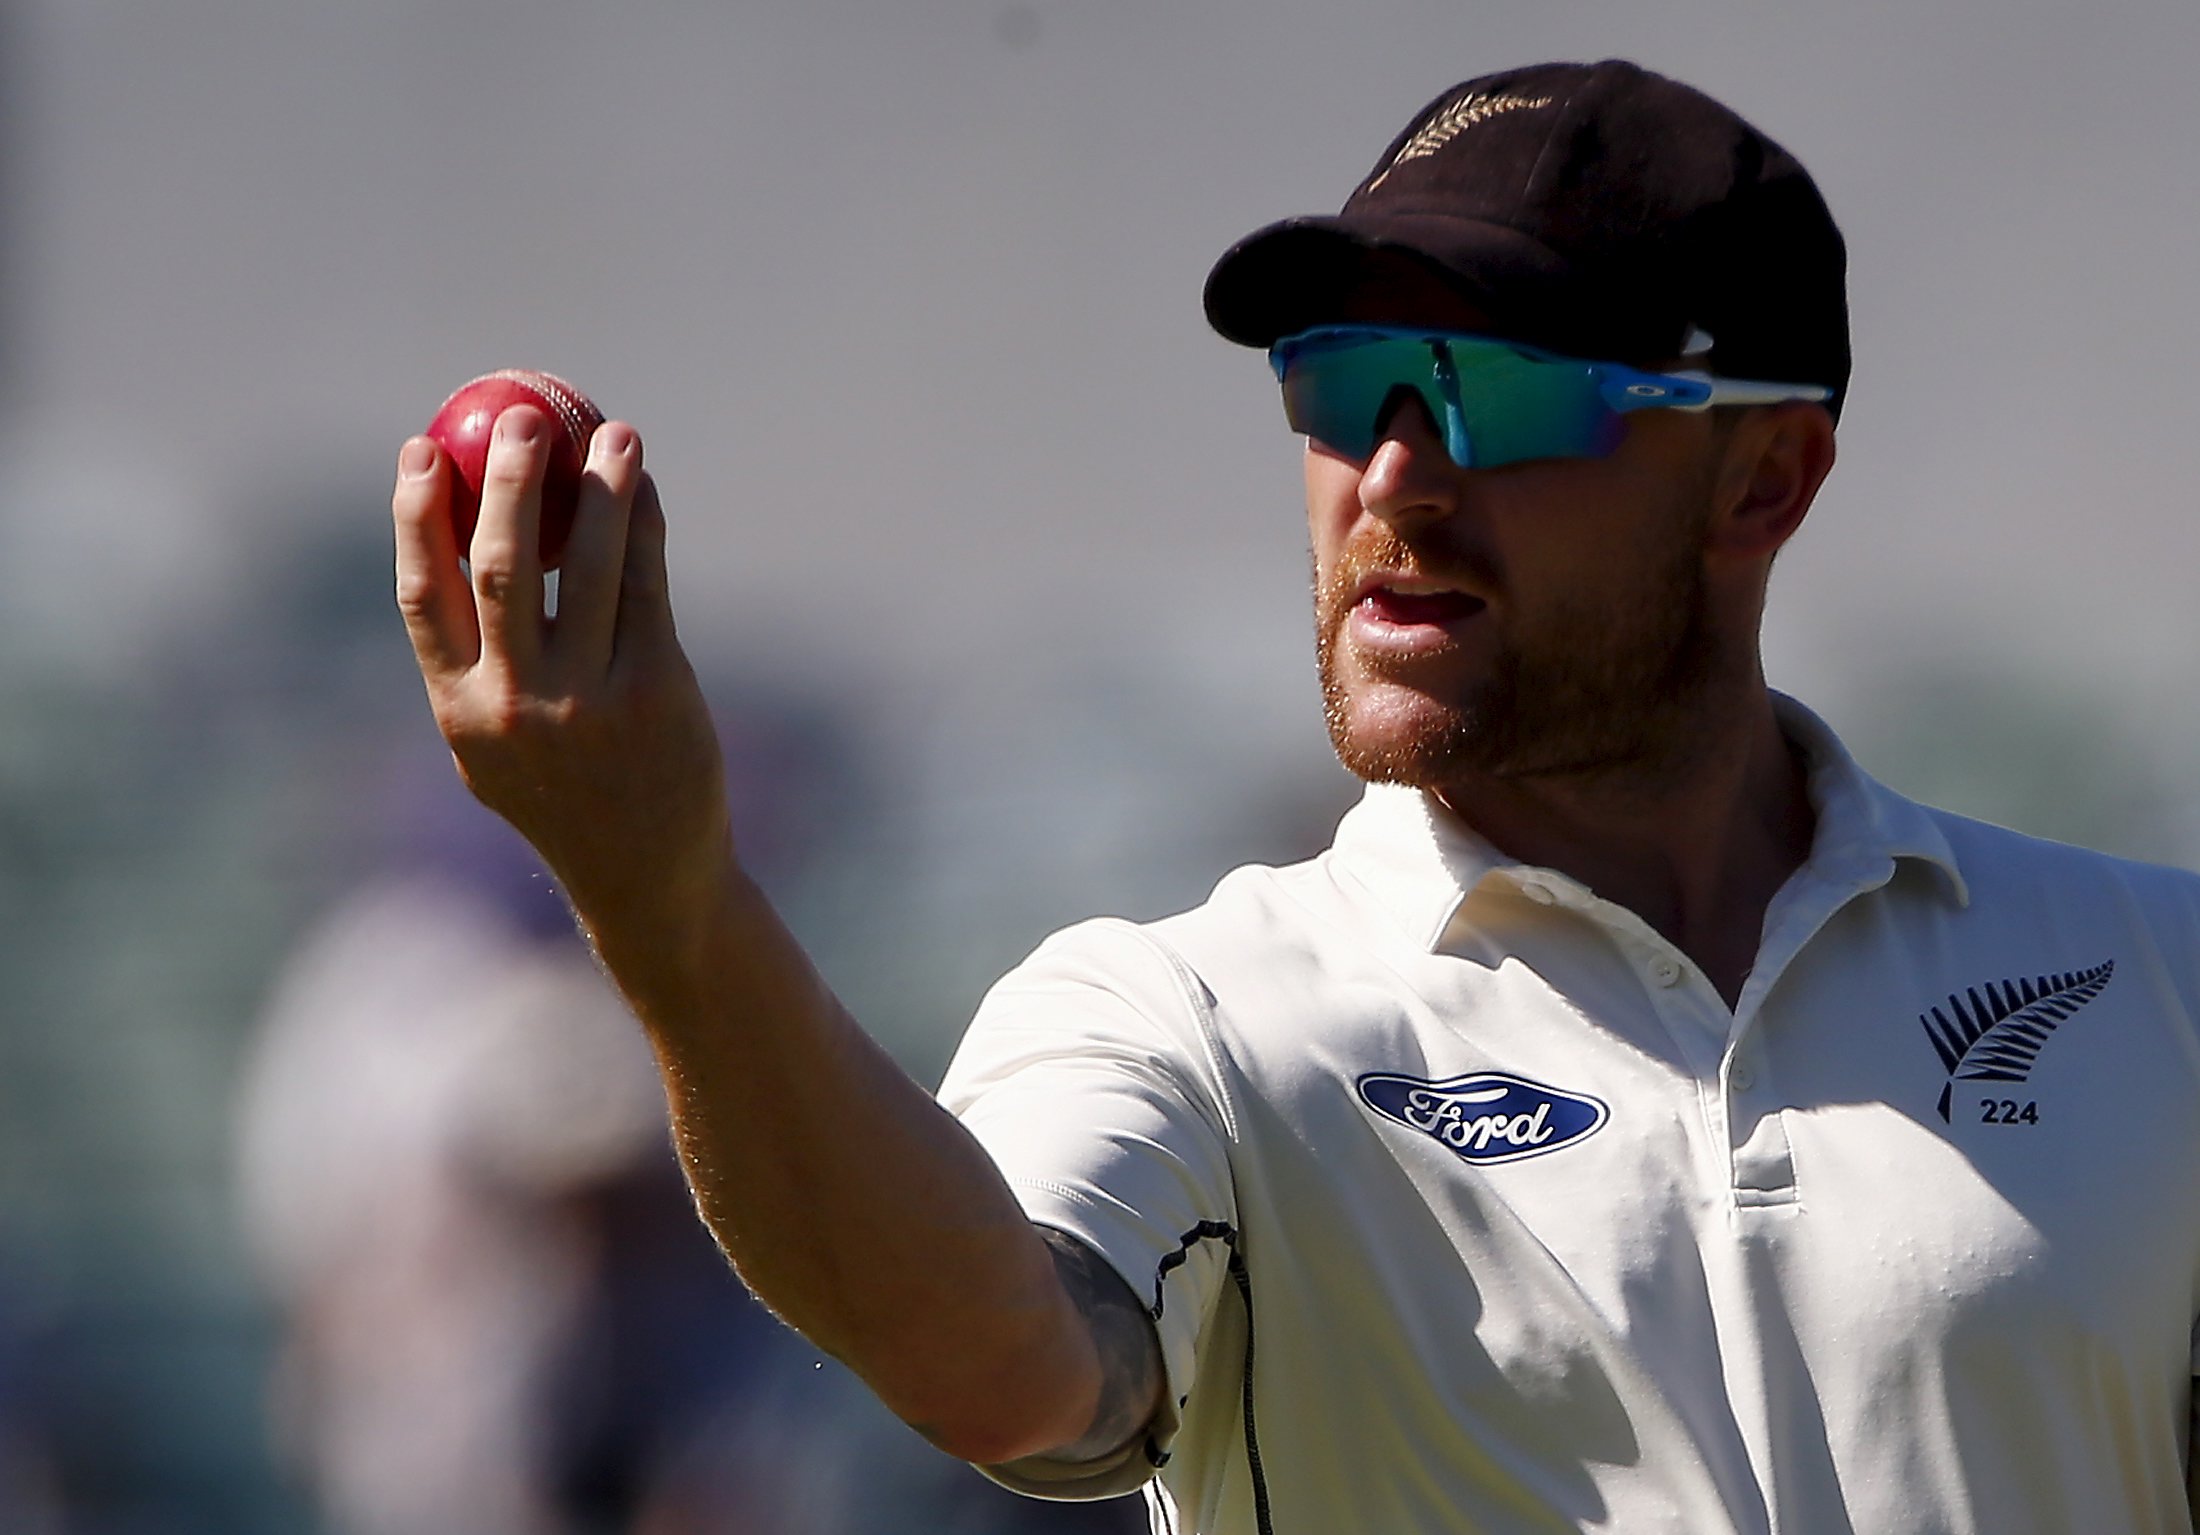 New Zealand captain Brendon McCullum inspects the ball during the fourth day of the second cricket test match against Australia at the WACA ground in Perth, Western Australia, November 16, 2015.      REUTERS/David Gray